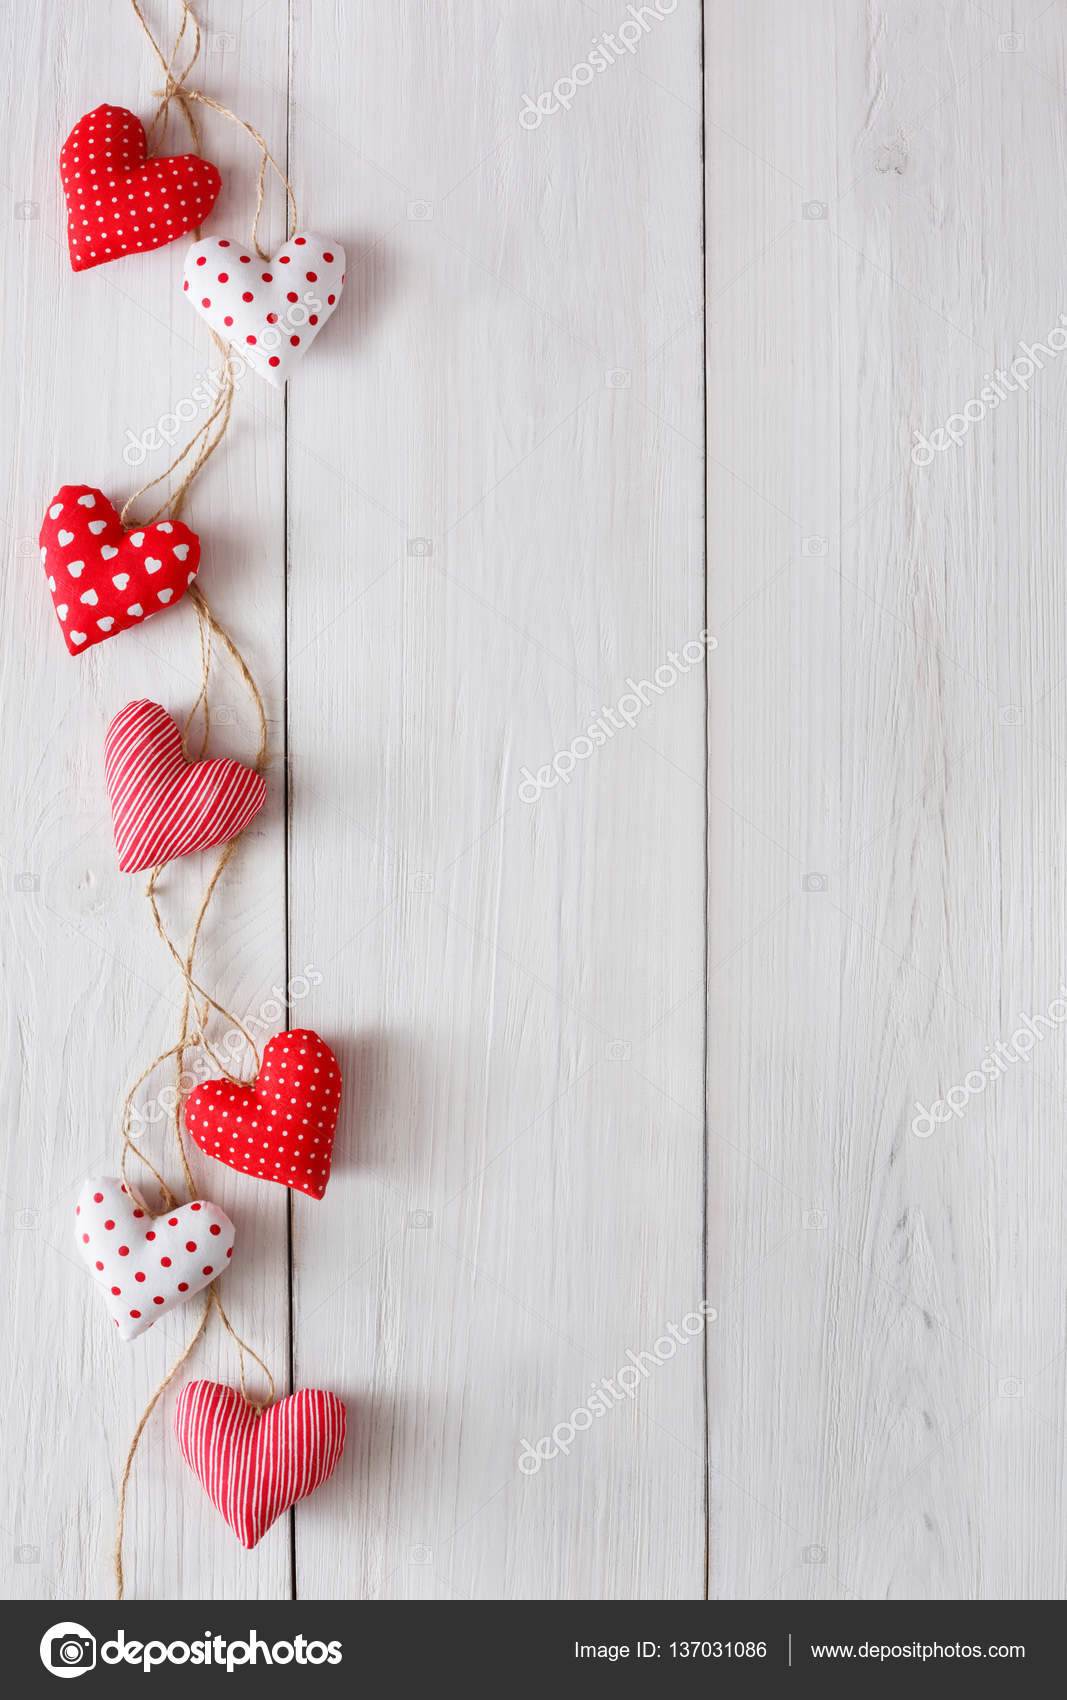 5517078 Valentines Day Images Stock Photos  Vectors  Shutterstock